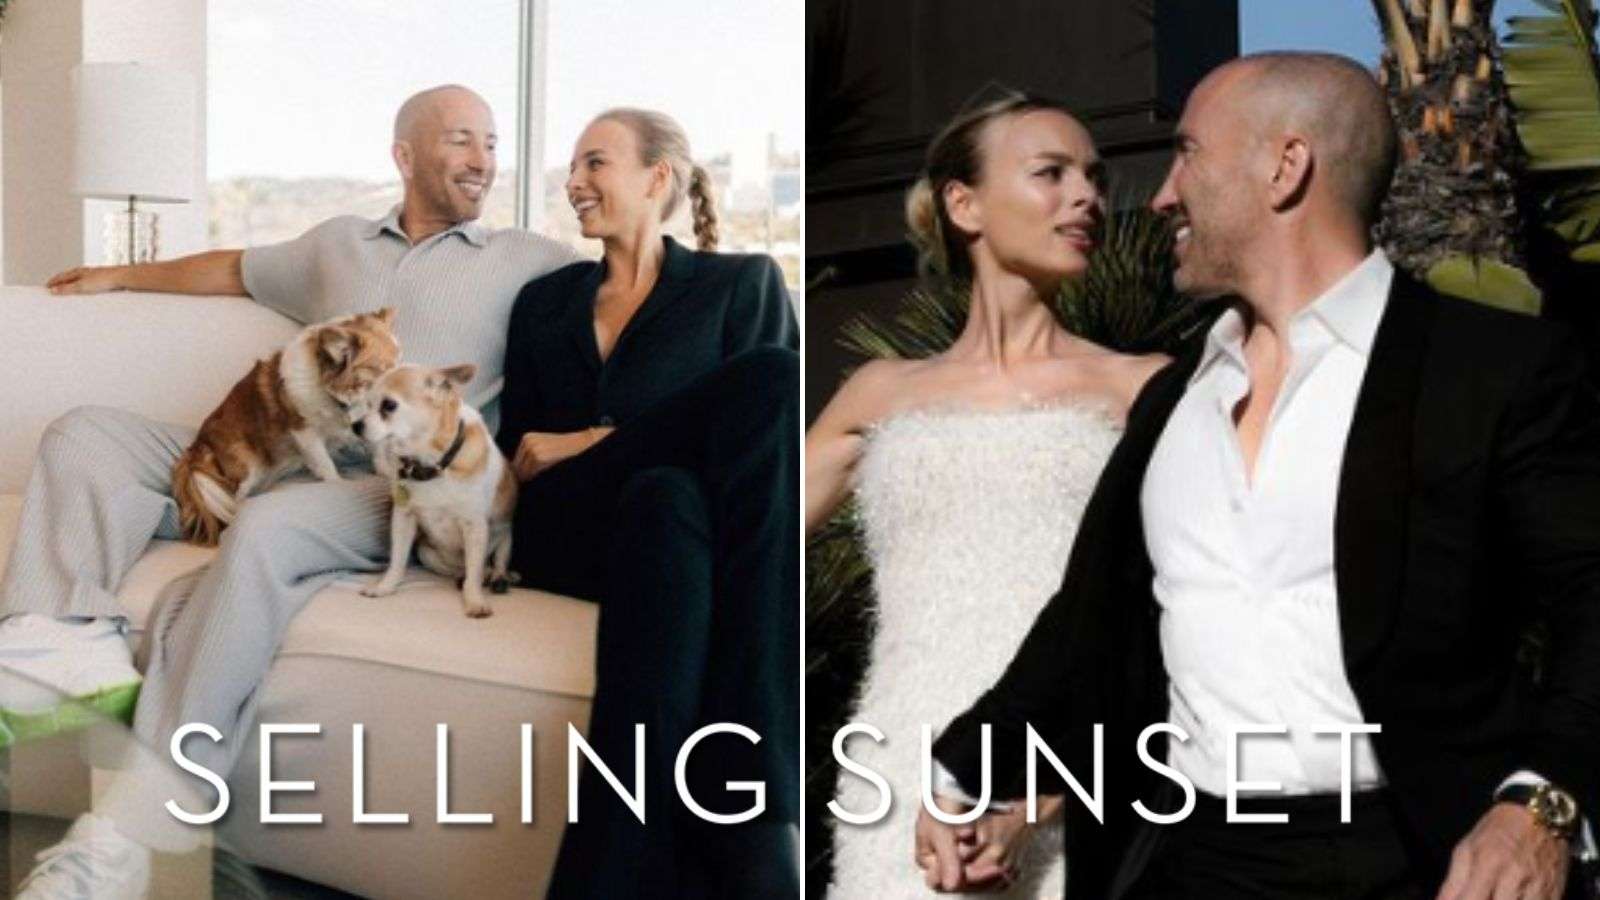 Jason and Marie-Lou from Selling Sunset